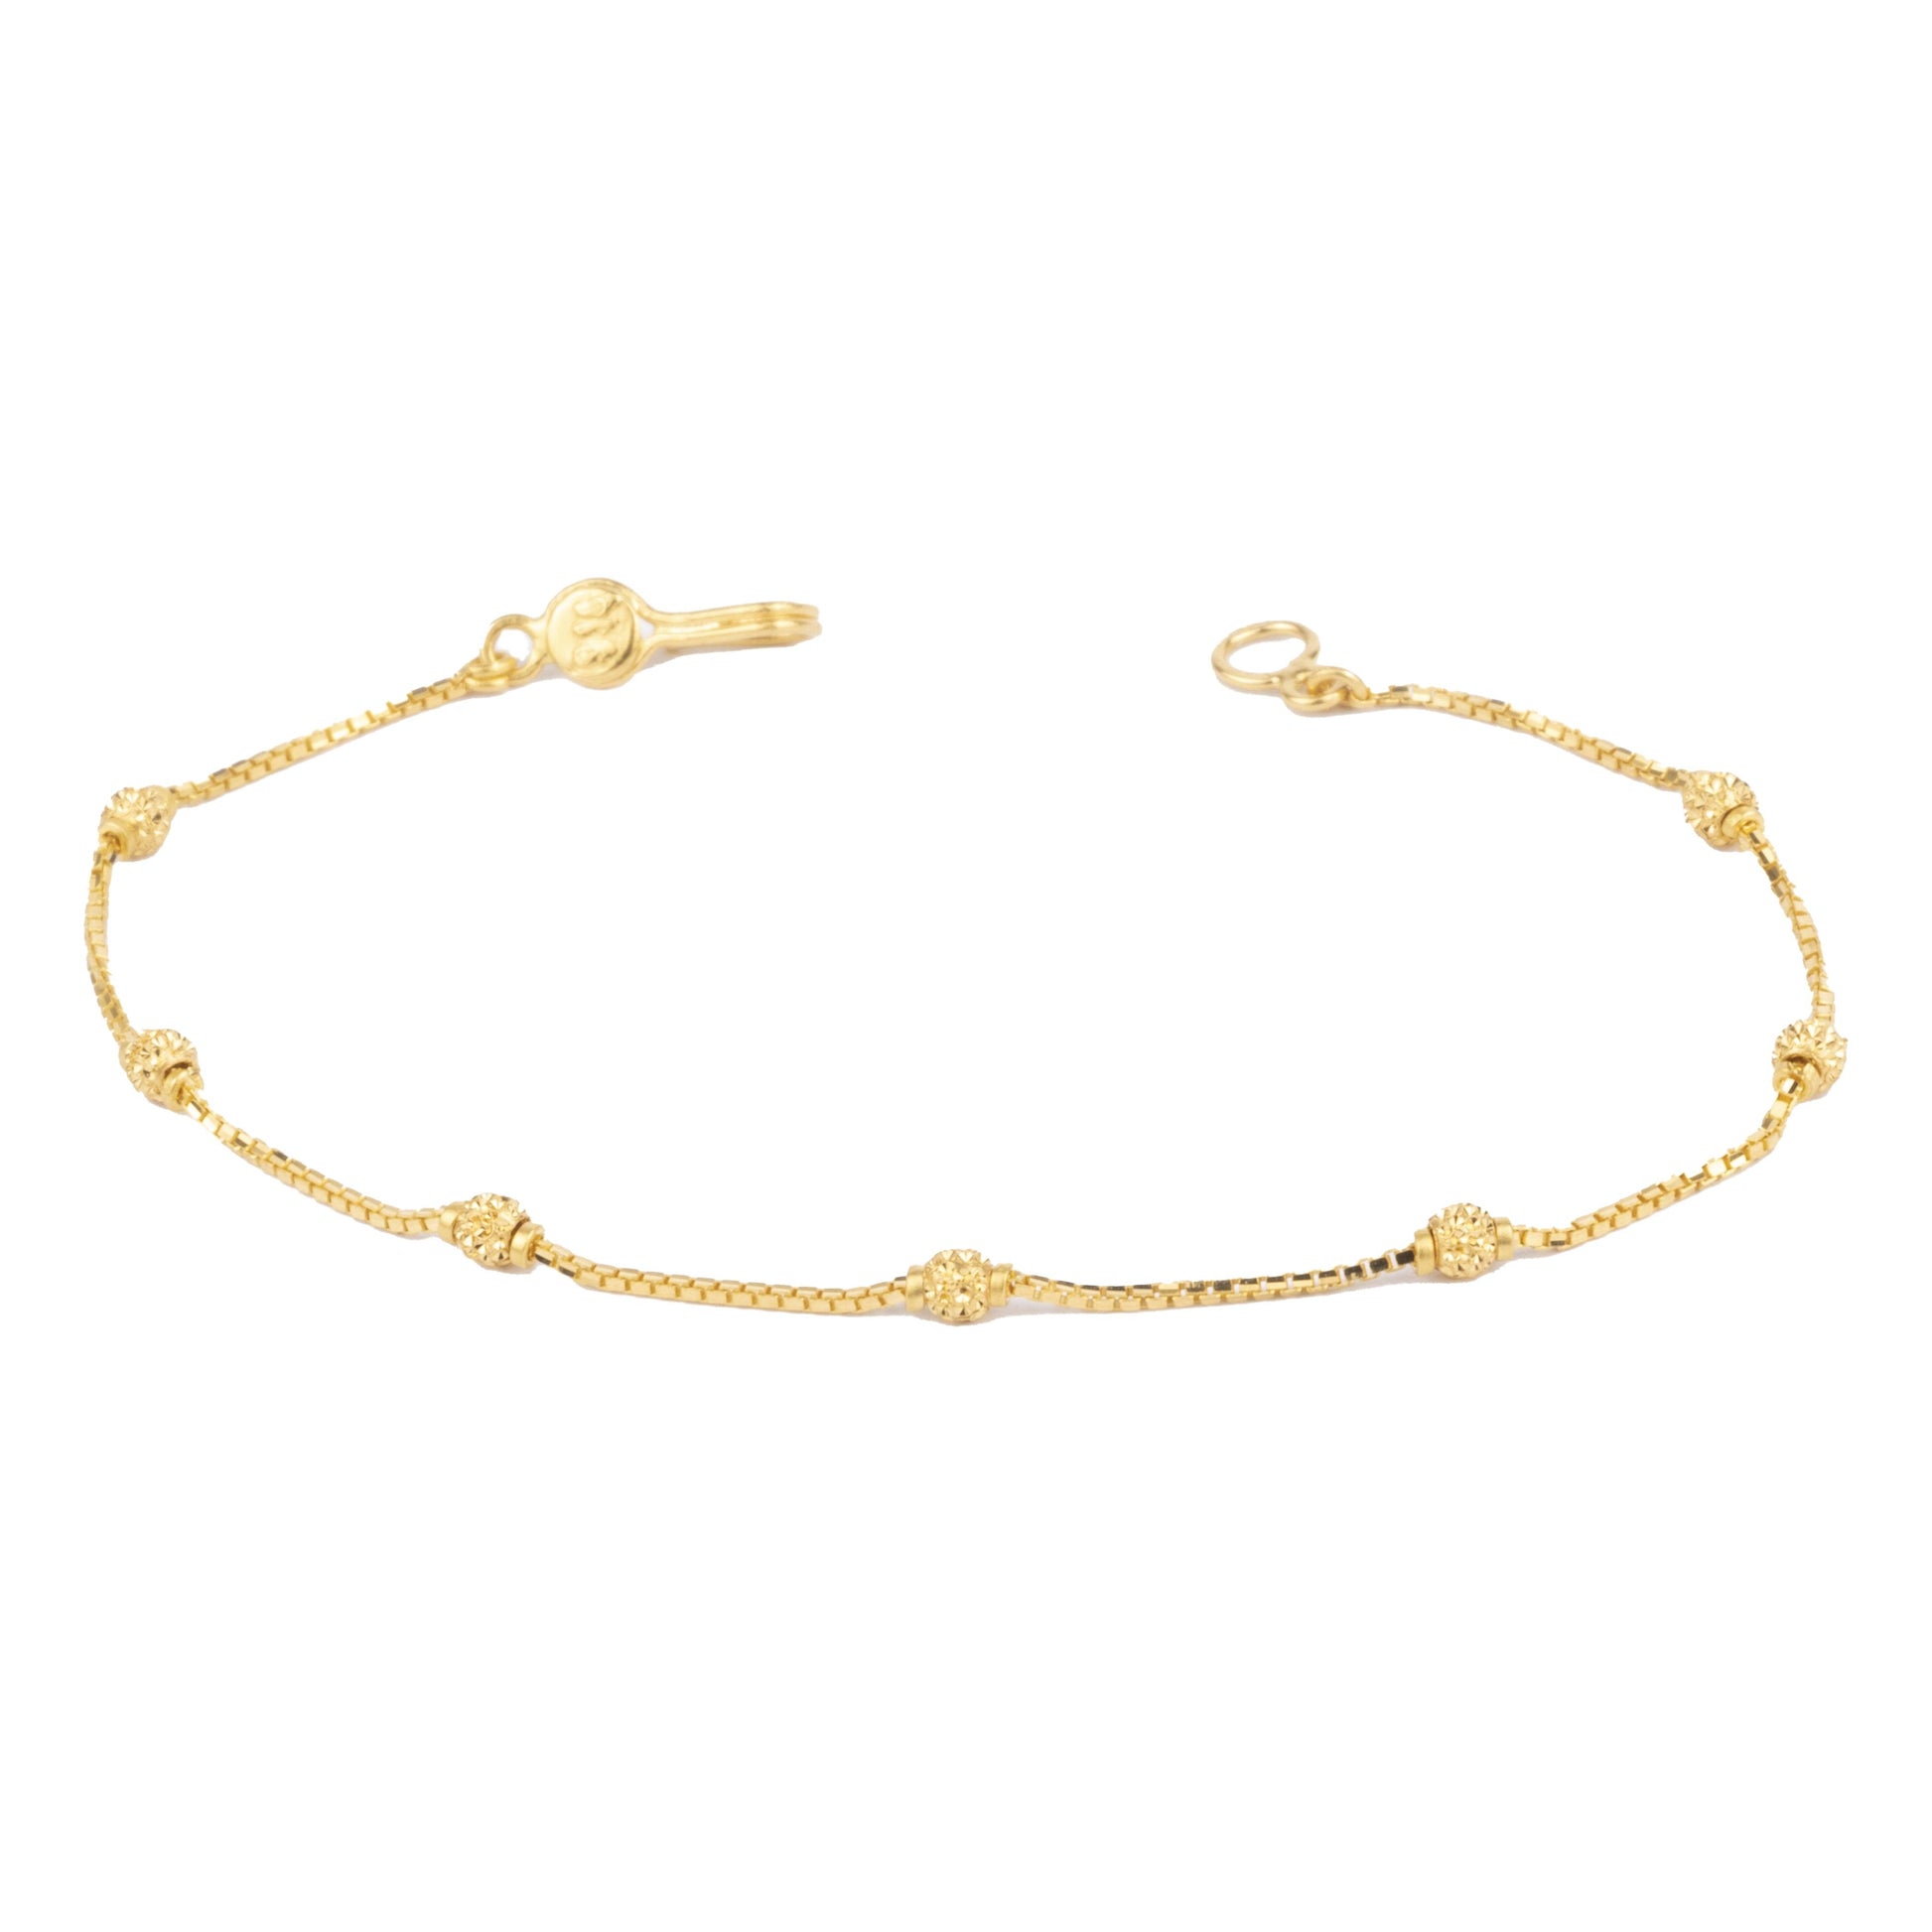 22ct Gold Box Chain Bracelet with Diamond Cut Beads and Hook Clasp LBR-7125 - Minar Jewellers